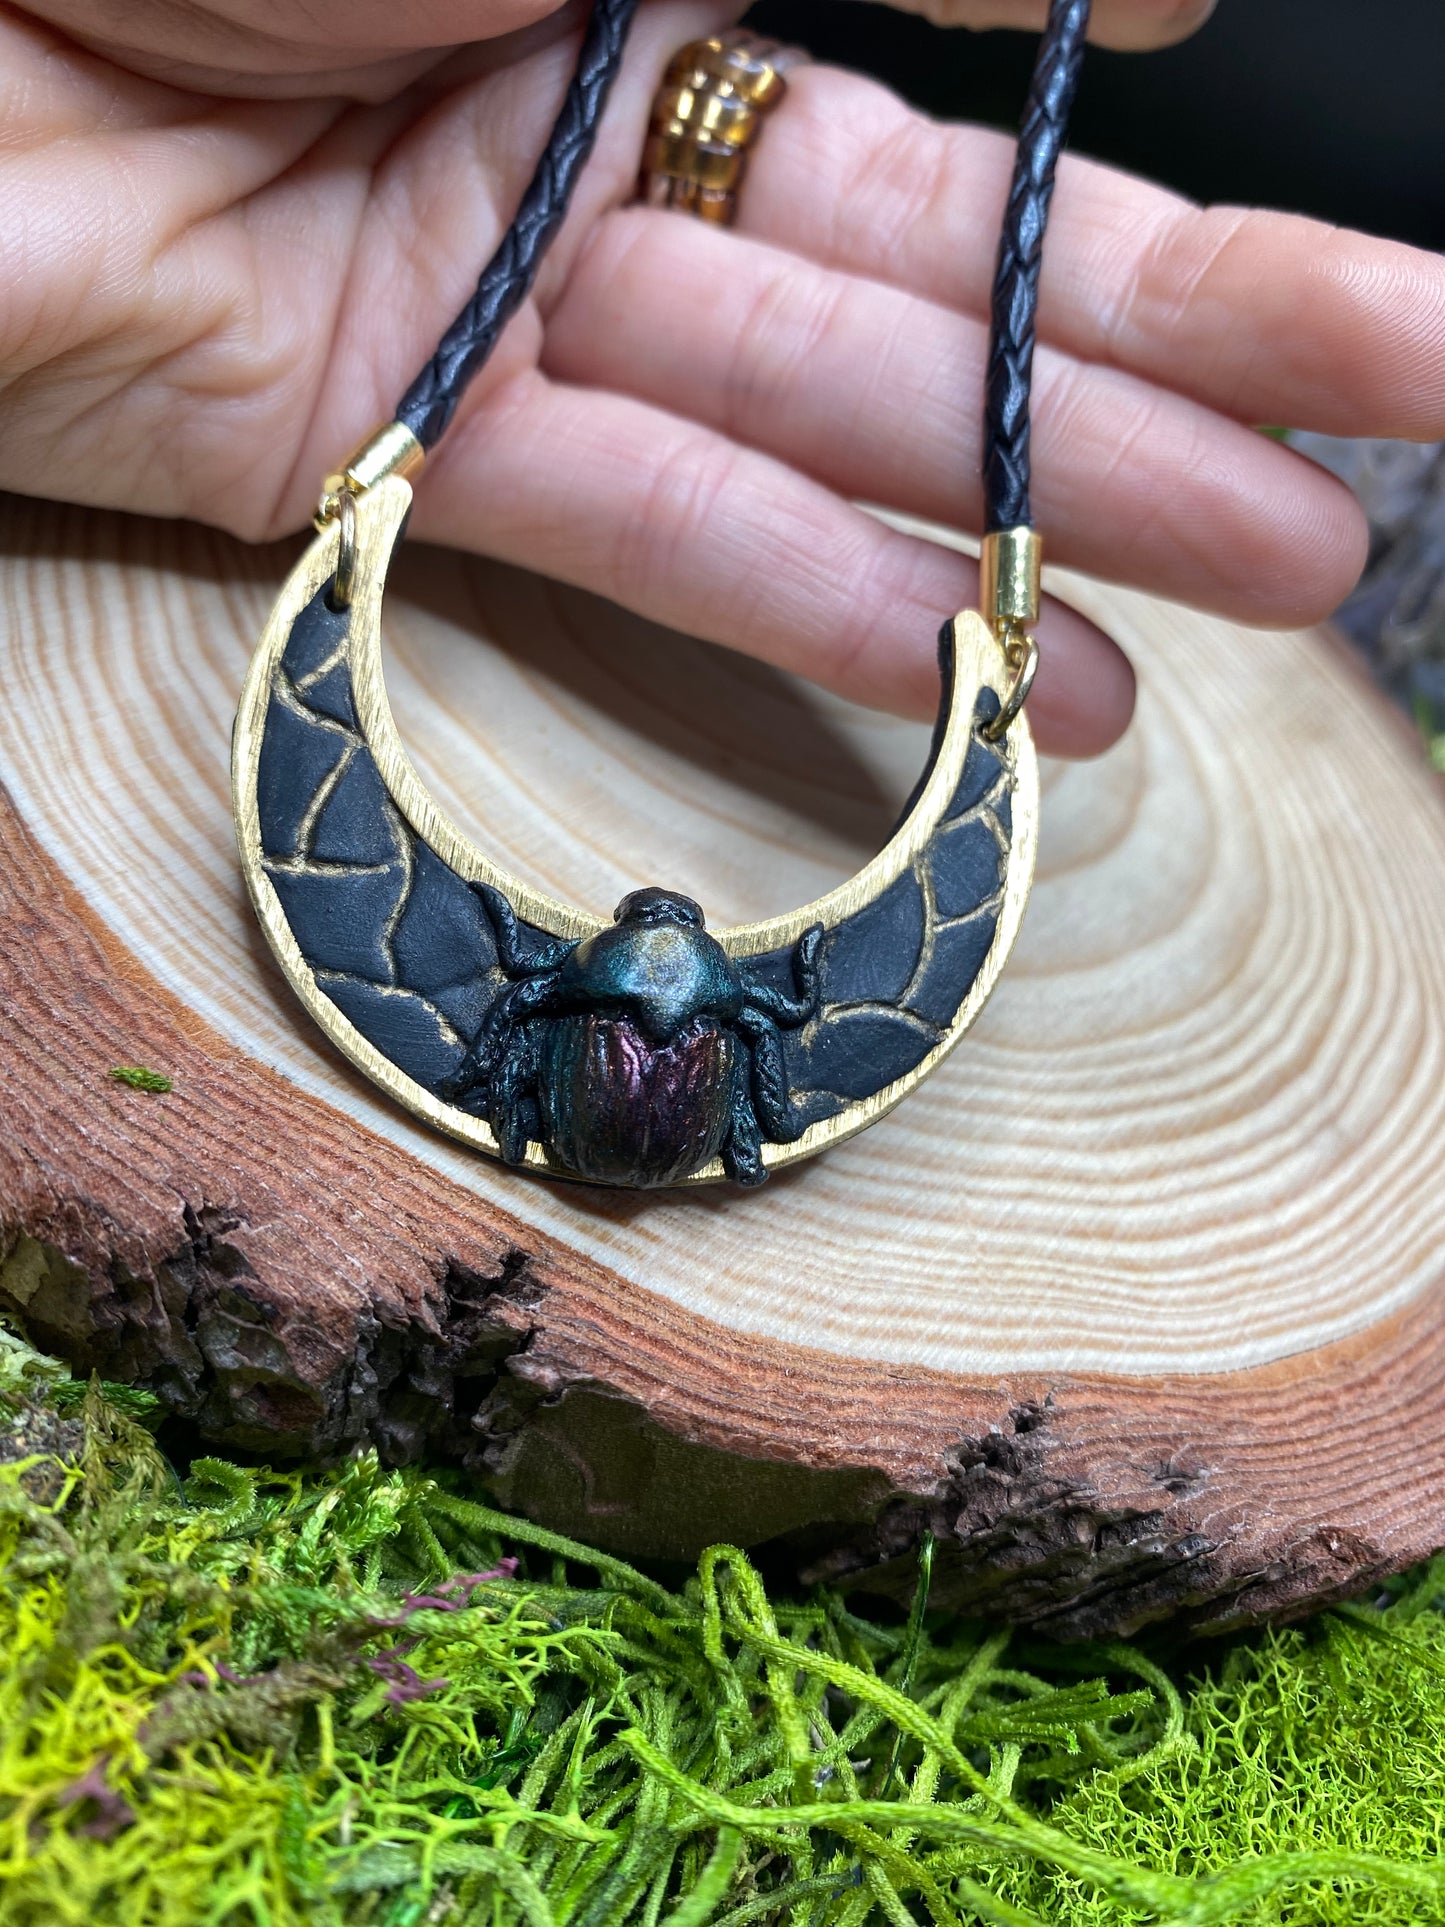 Black Scarab and Crescent Moon Necklace